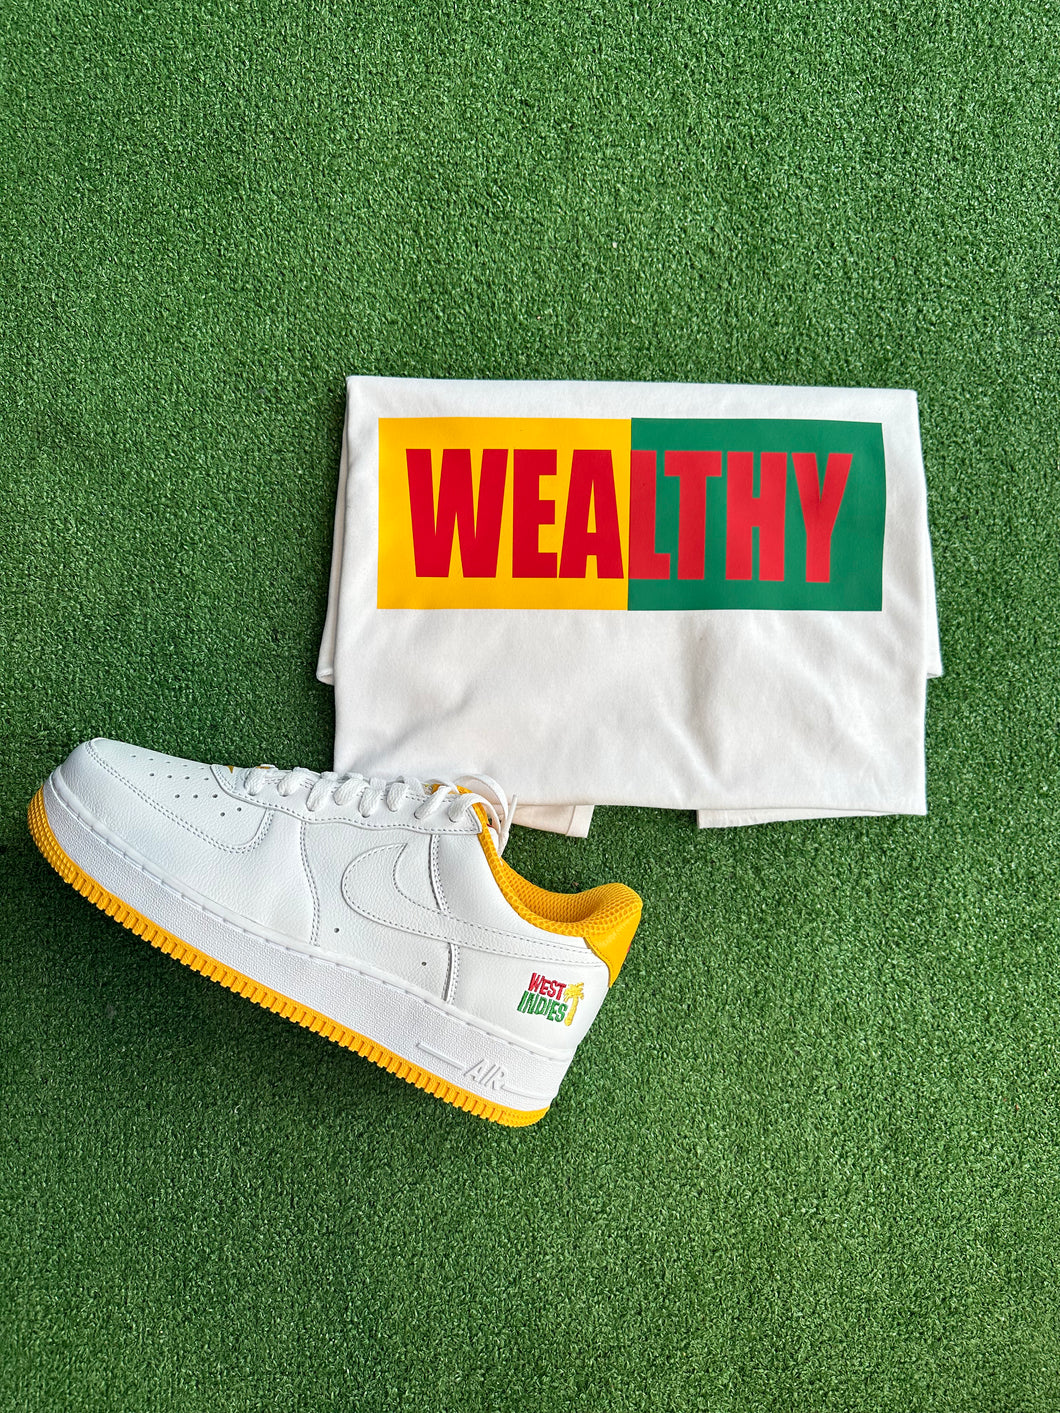 Wealthy Tee (White/Yellow/Green/Red)